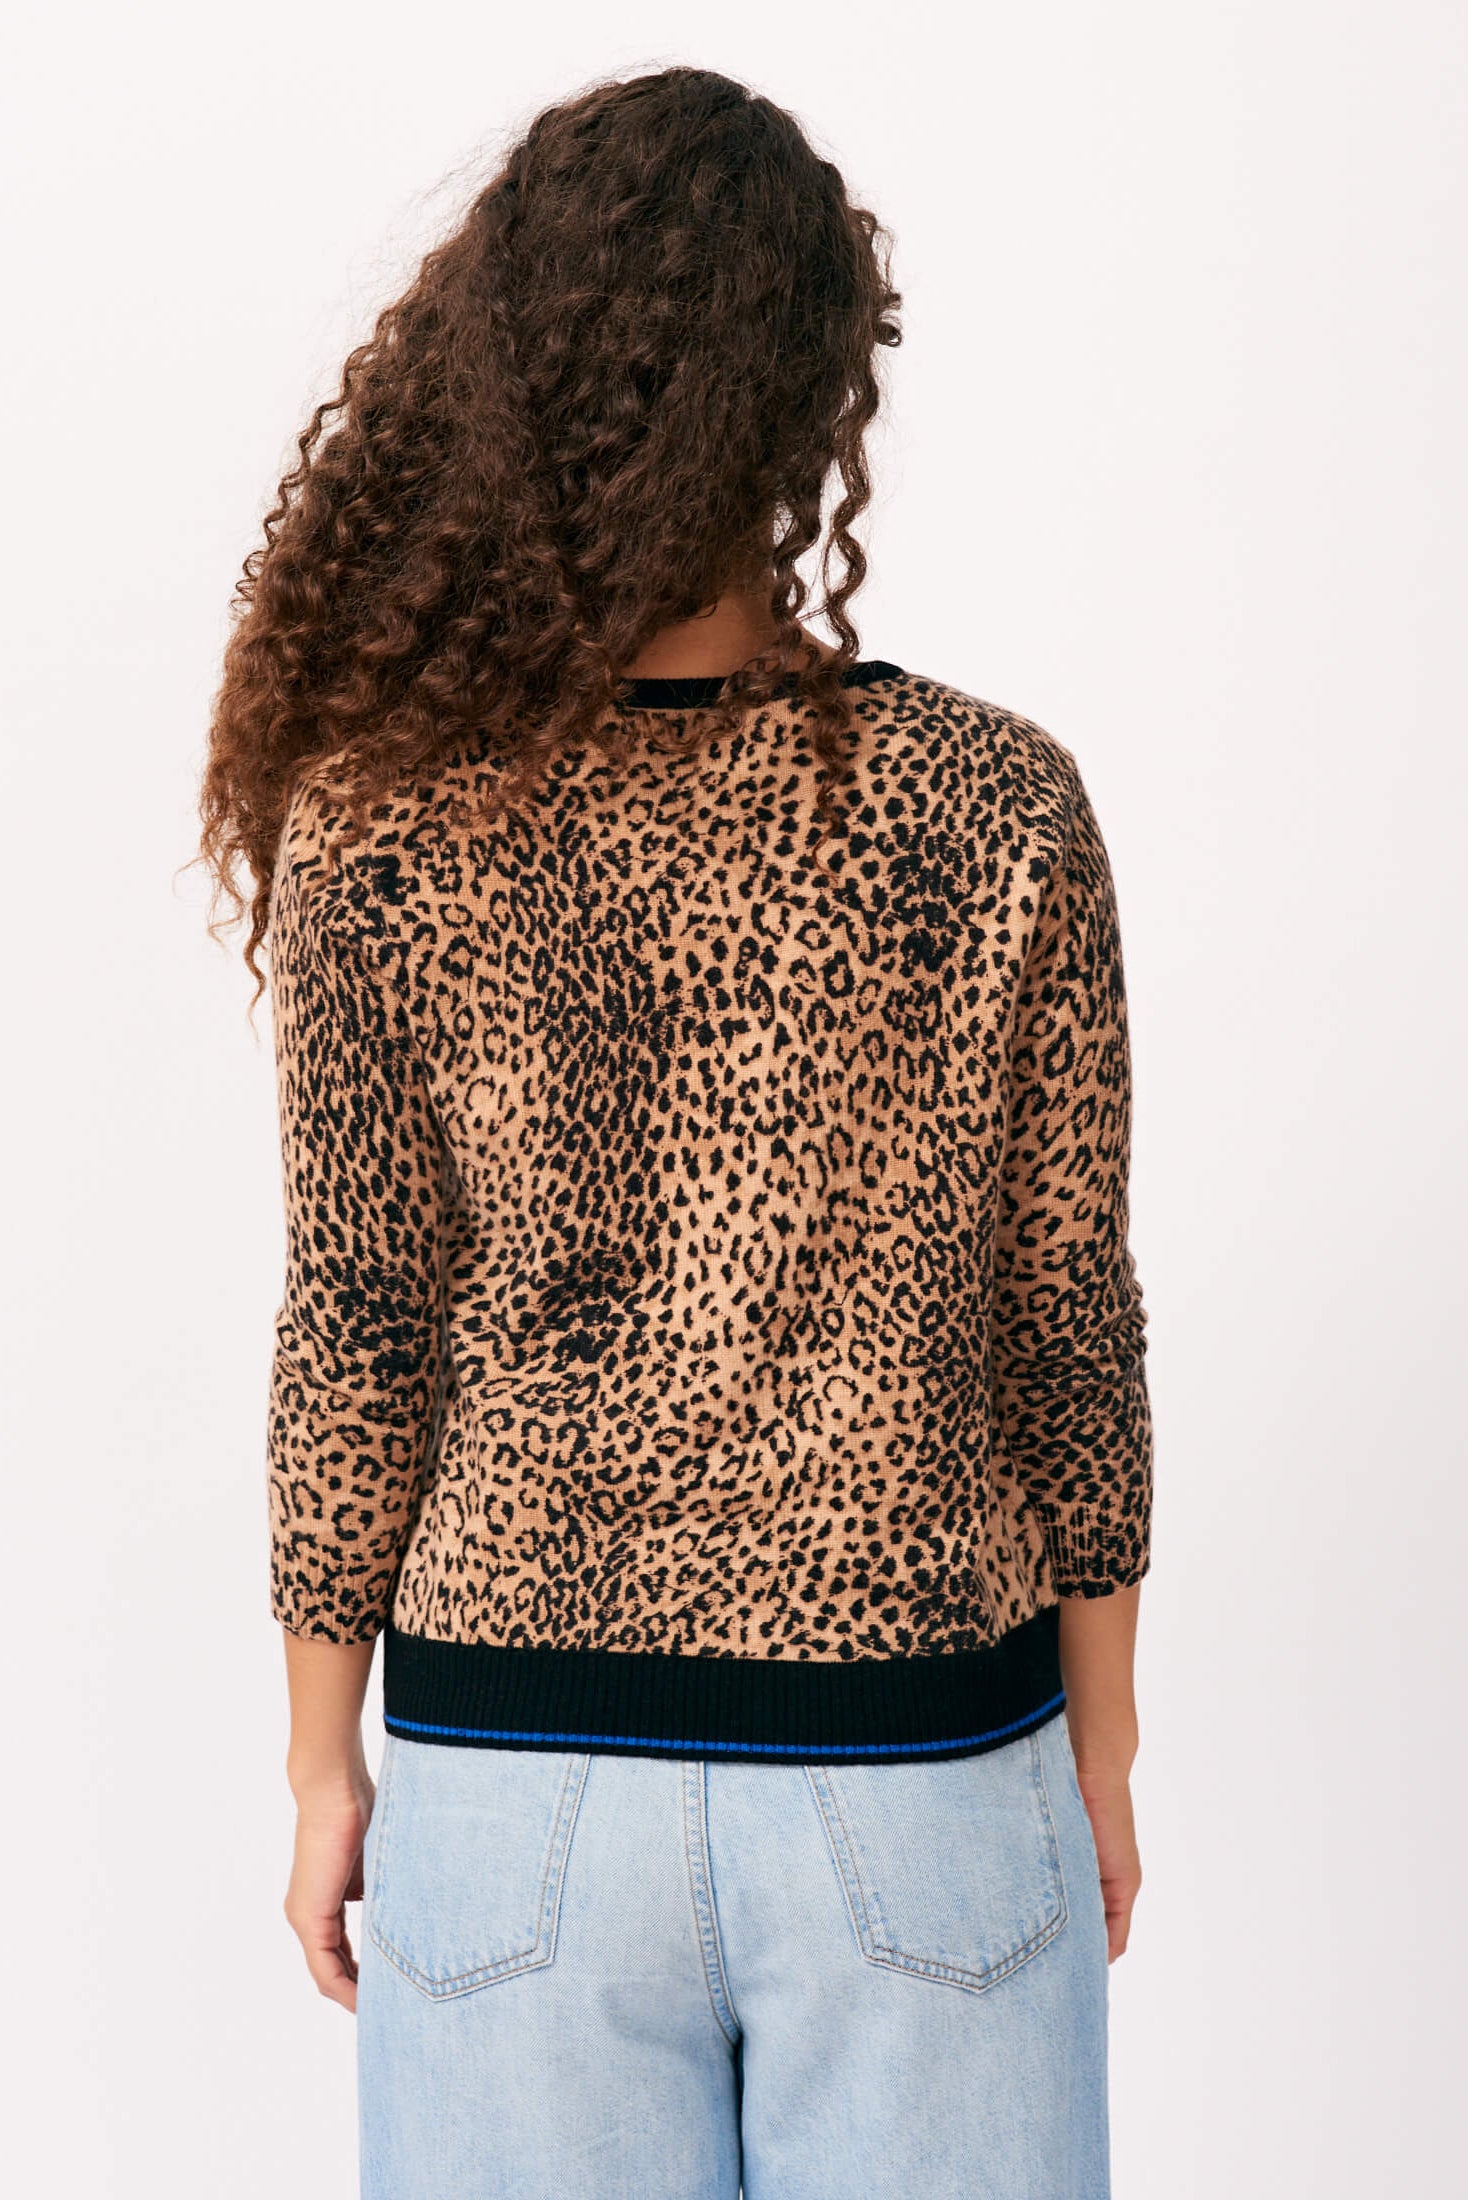 Brown haired female model wearing Jumper 1234 cashmere wool blend leopard print cashmere cardigan facing away from the camera